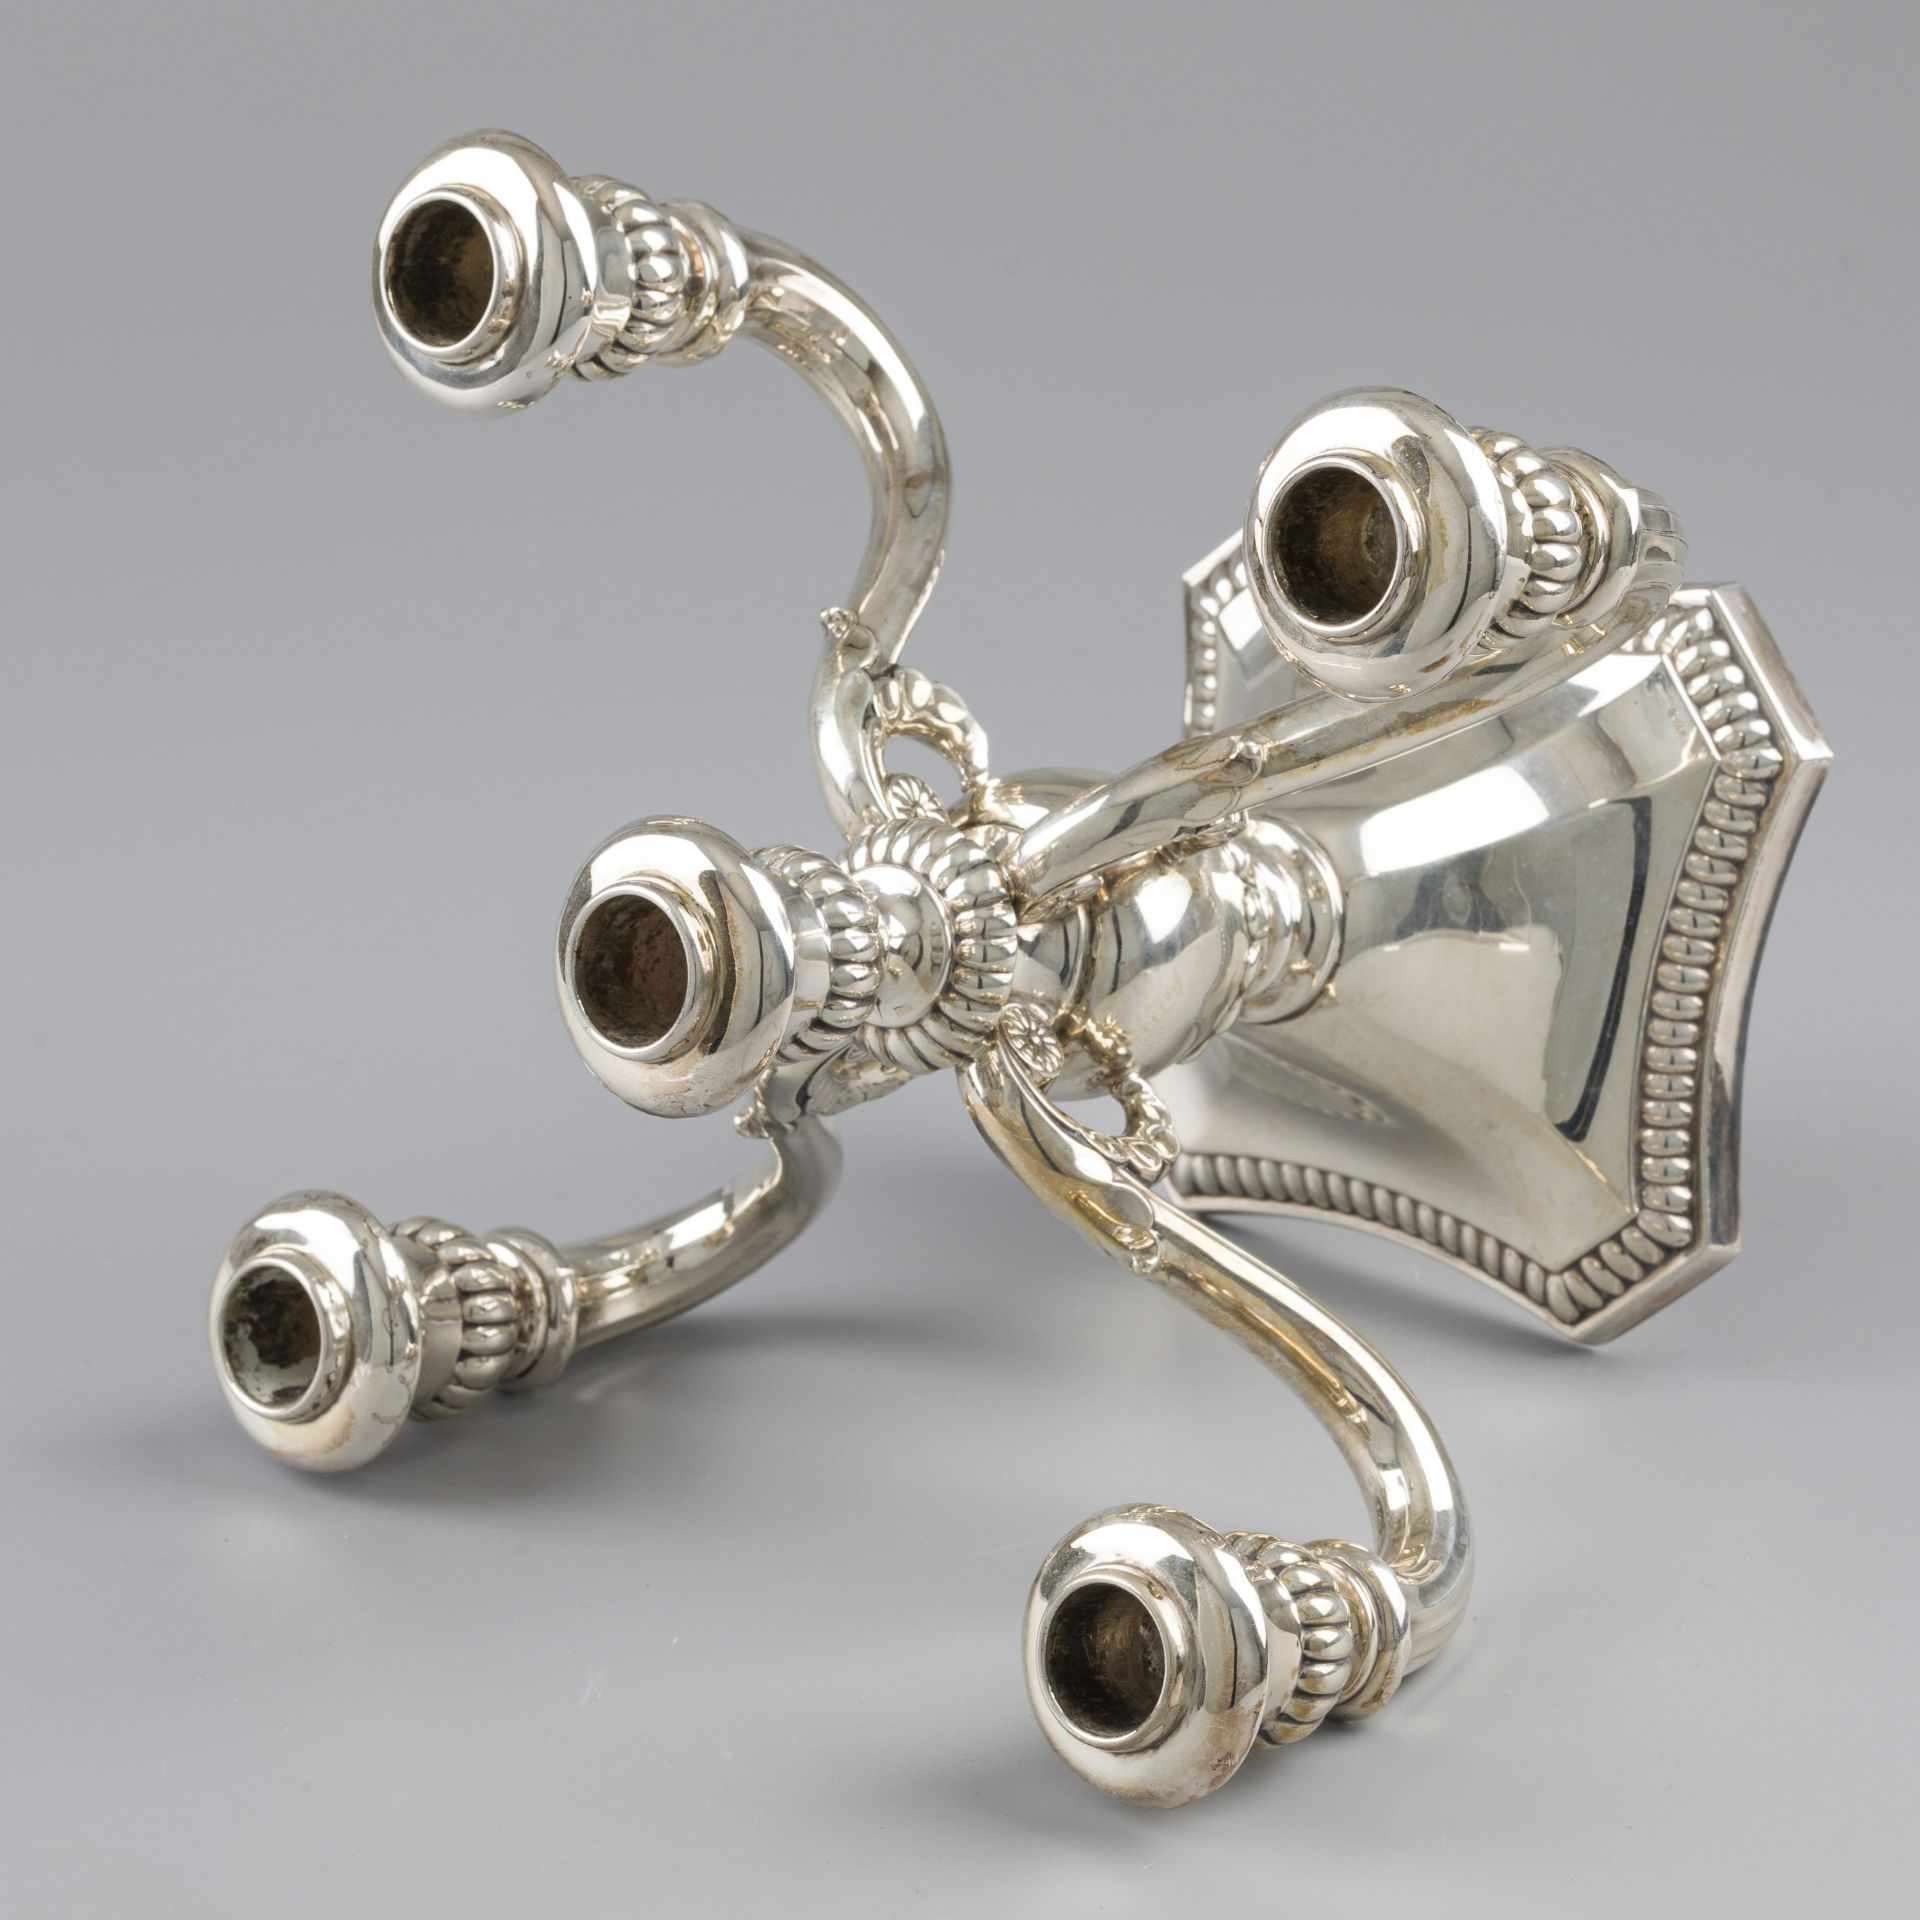 Four-armed candlestick silver. - Image 2 of 3